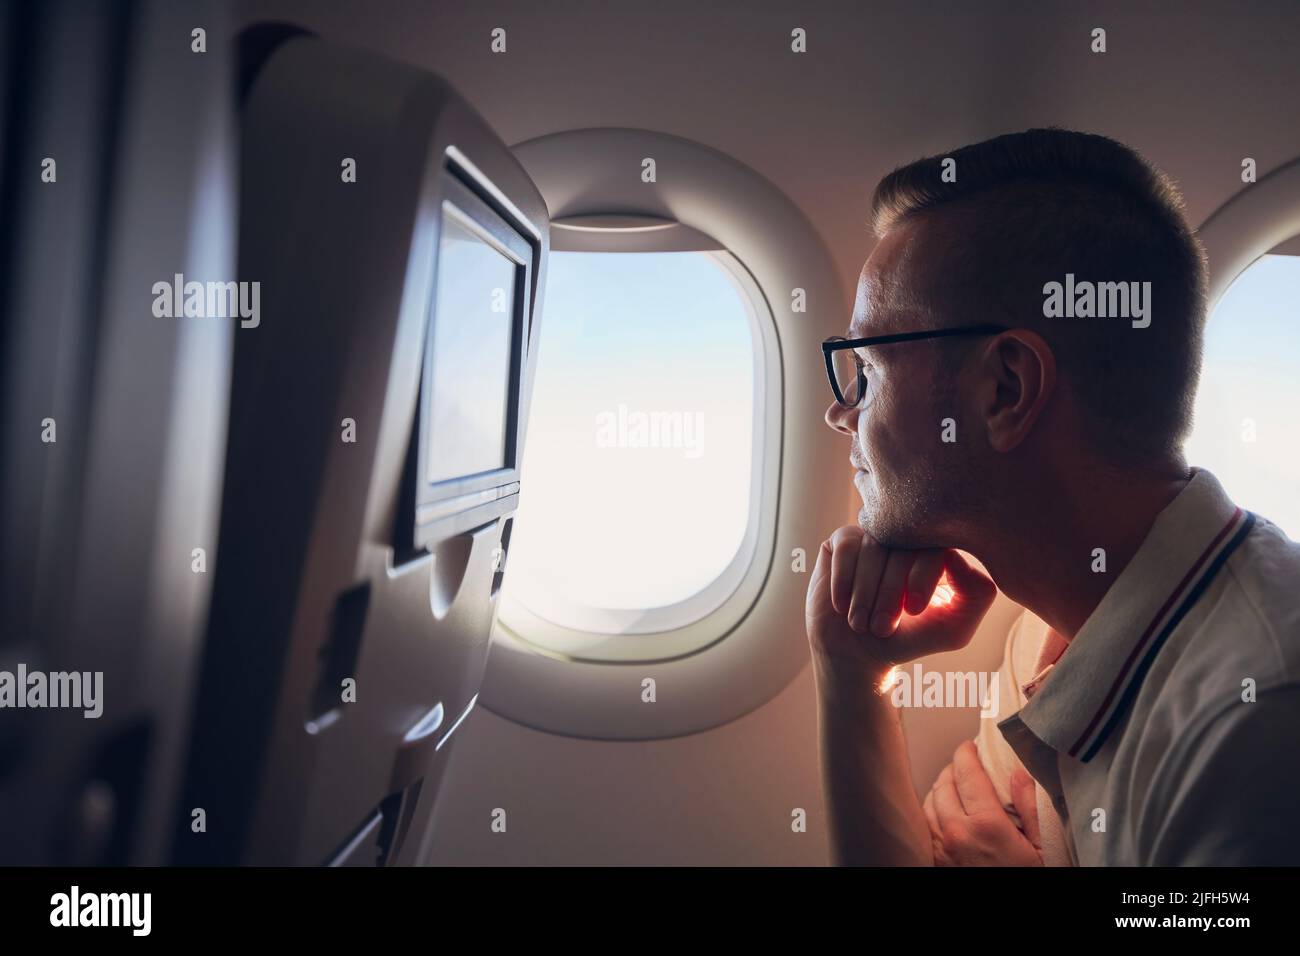 Portrait of man traveling by airplane. Passenger looking through plane window during flight Stock Photo